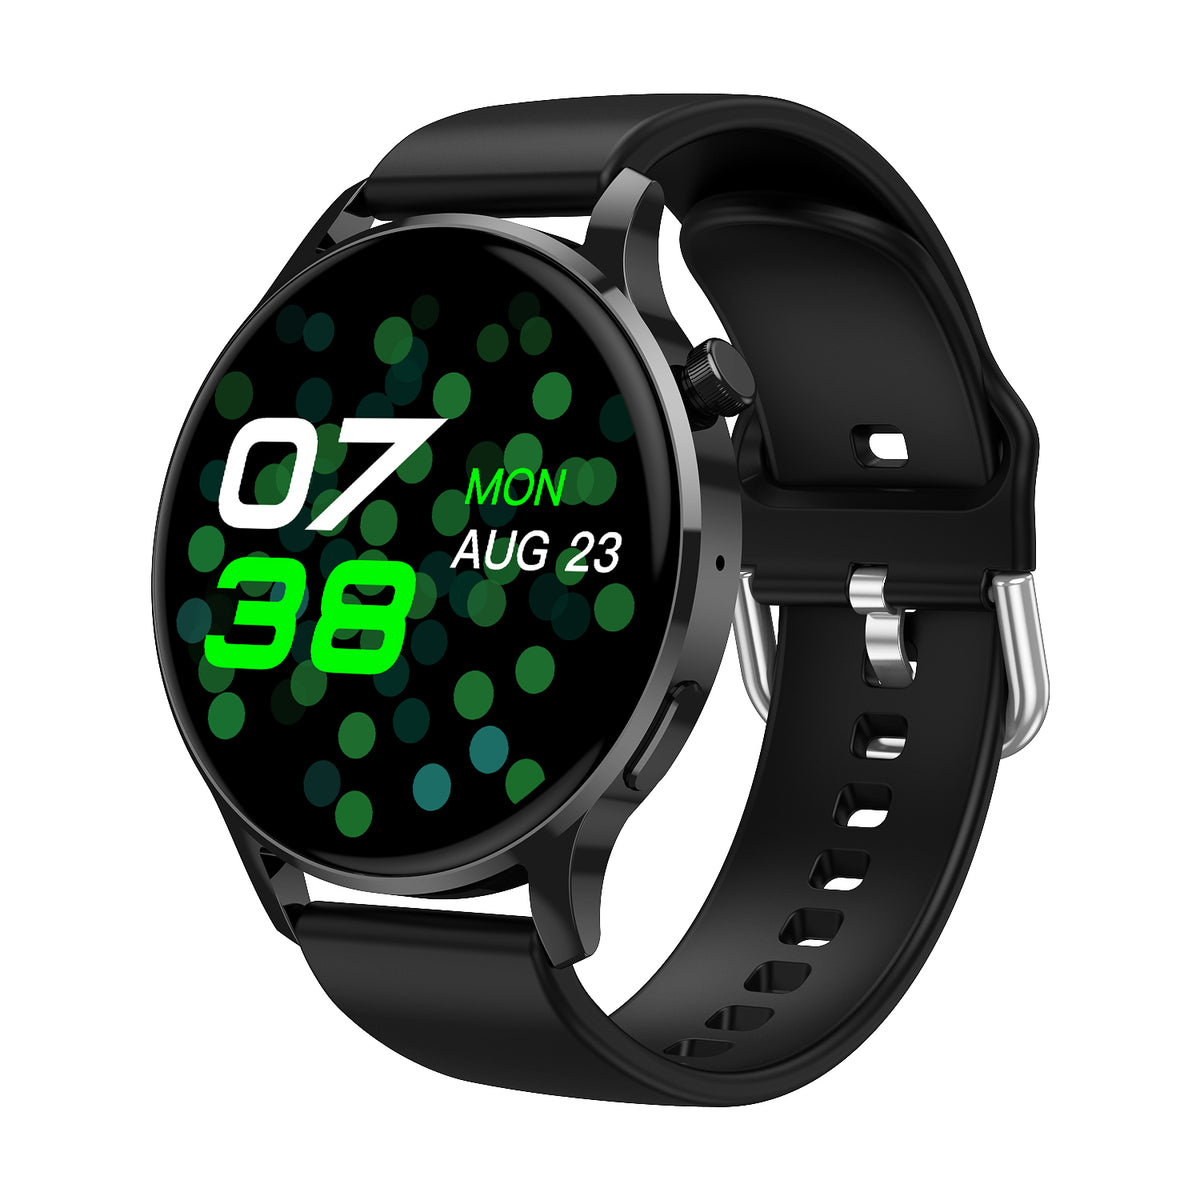 BEARSCOME Watch 3 Pro Smartwatch High-definition screen for Blood sugar/Blood pressure/heart rate monitoring/NFC